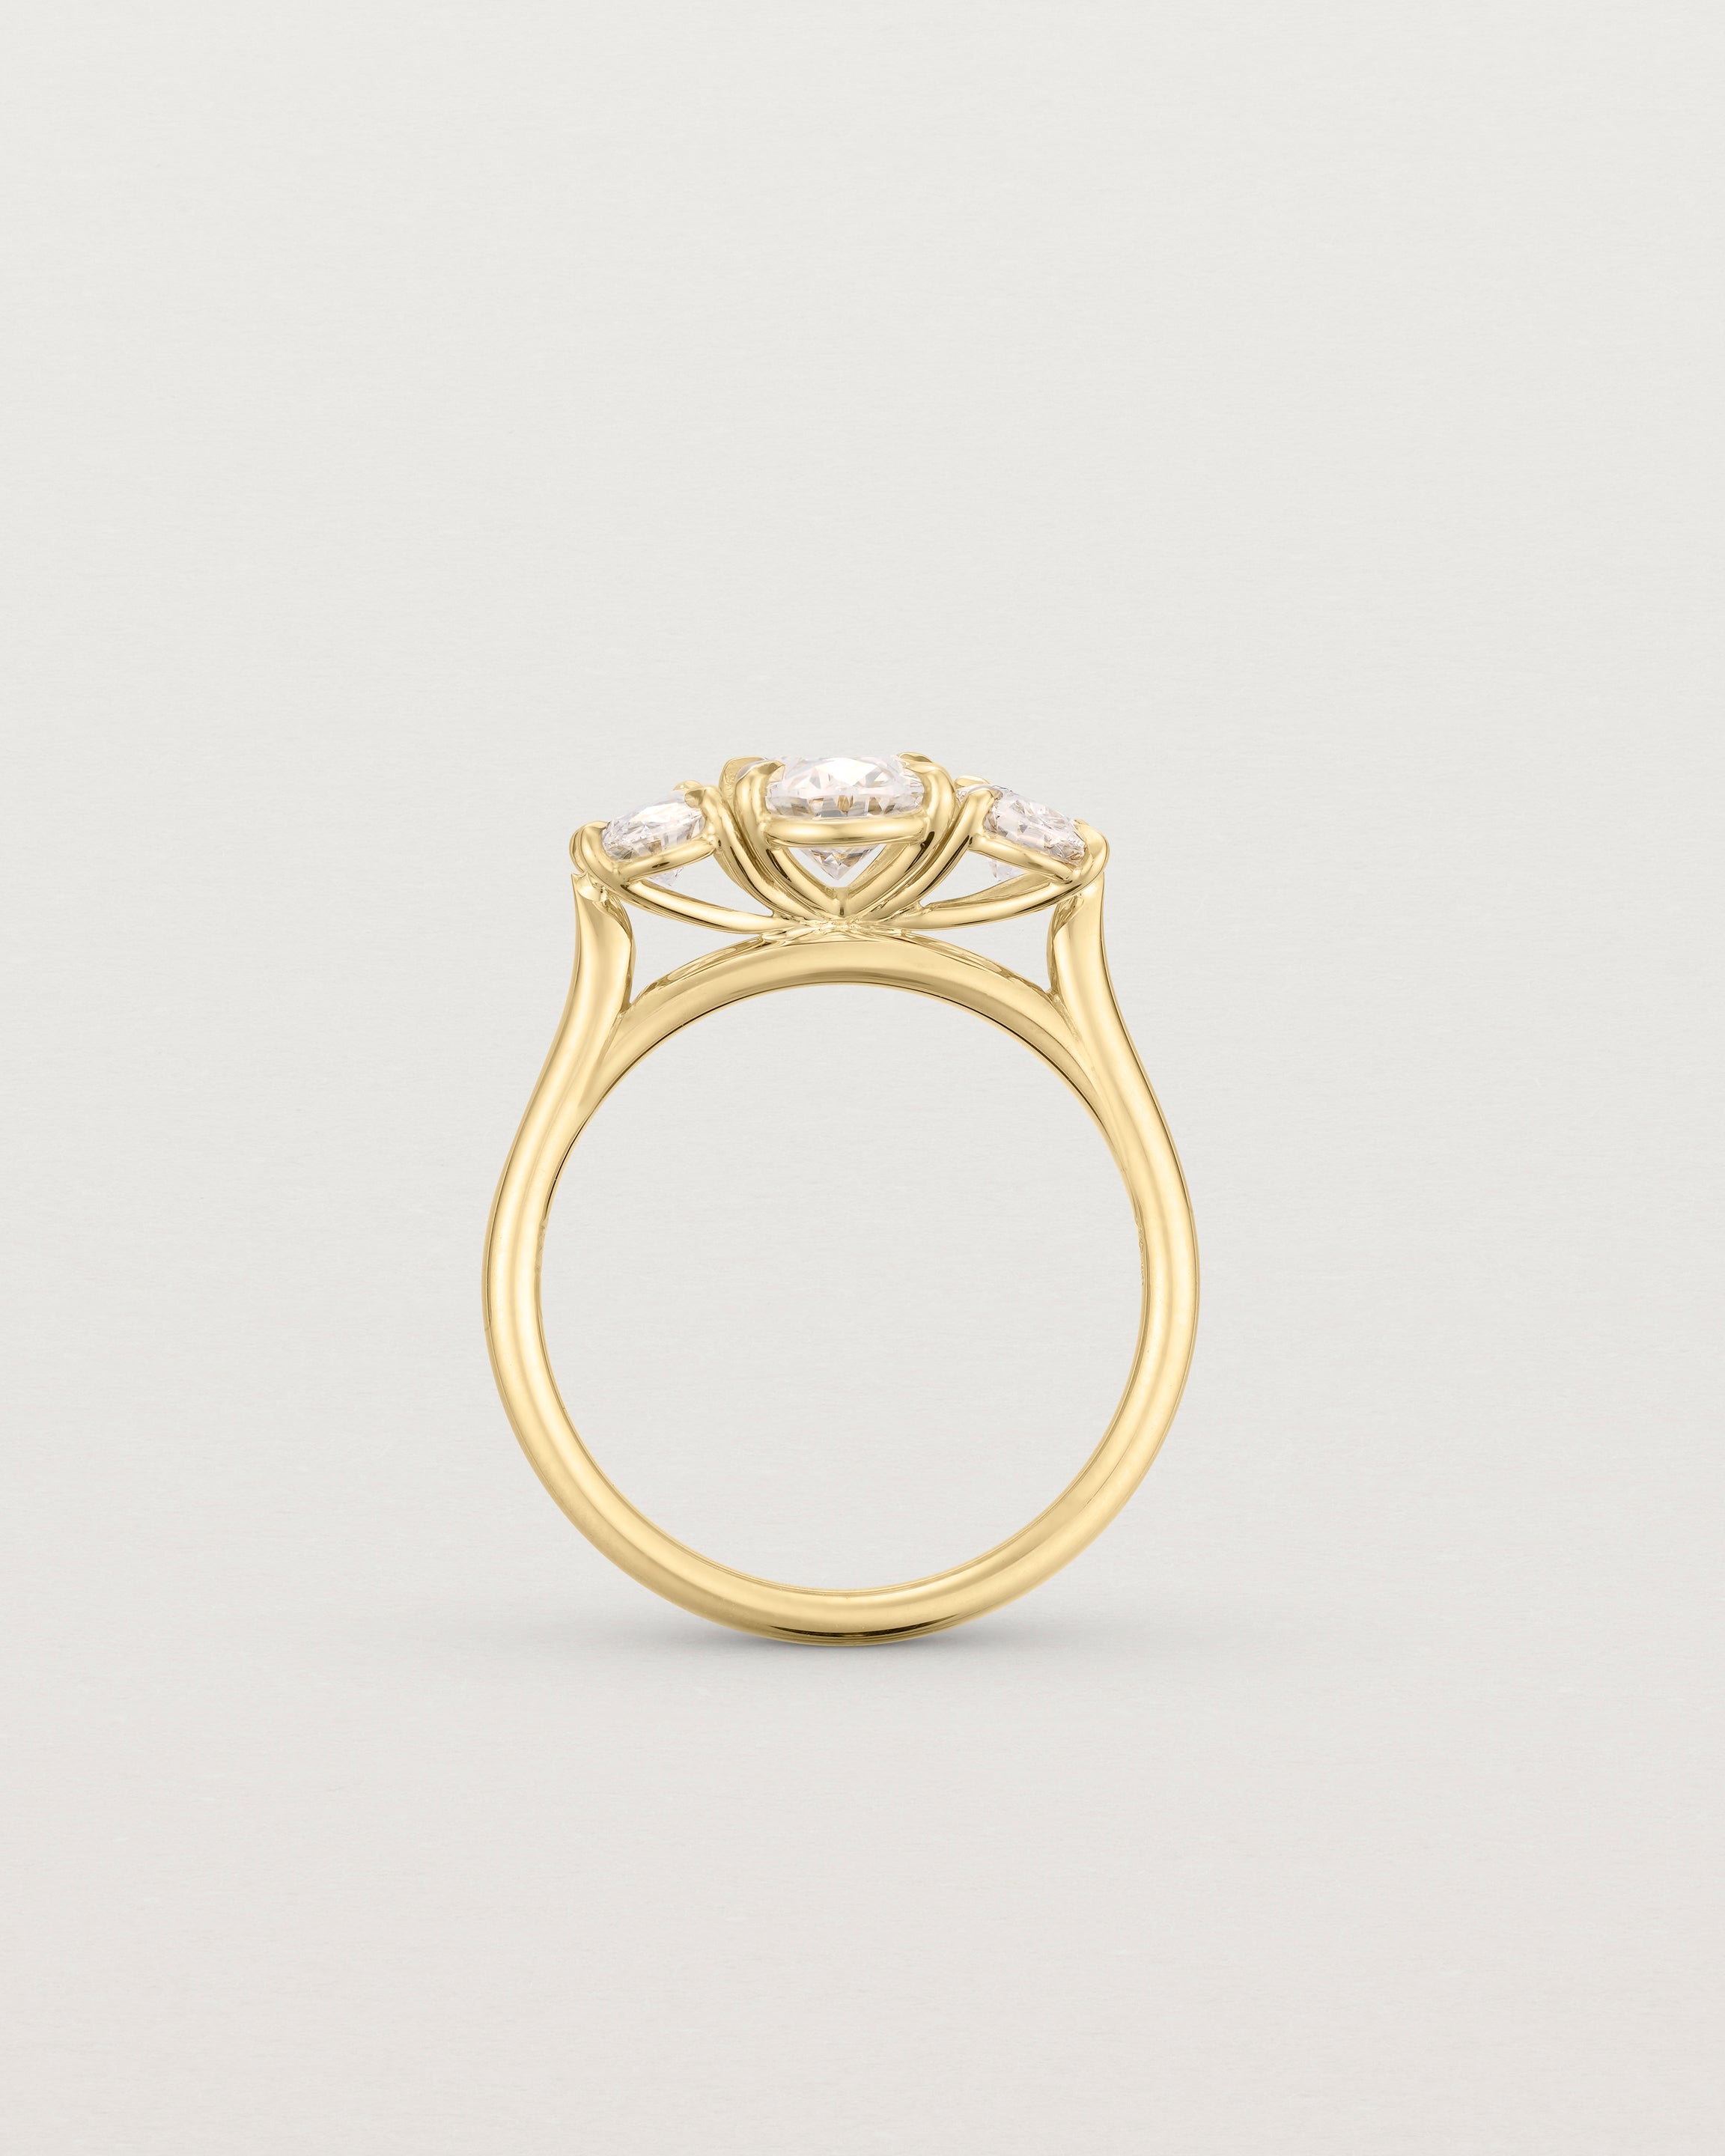 Standing view of the Kahlia Trio Ring | Laboratory Grown Diamonds in yellow gold.